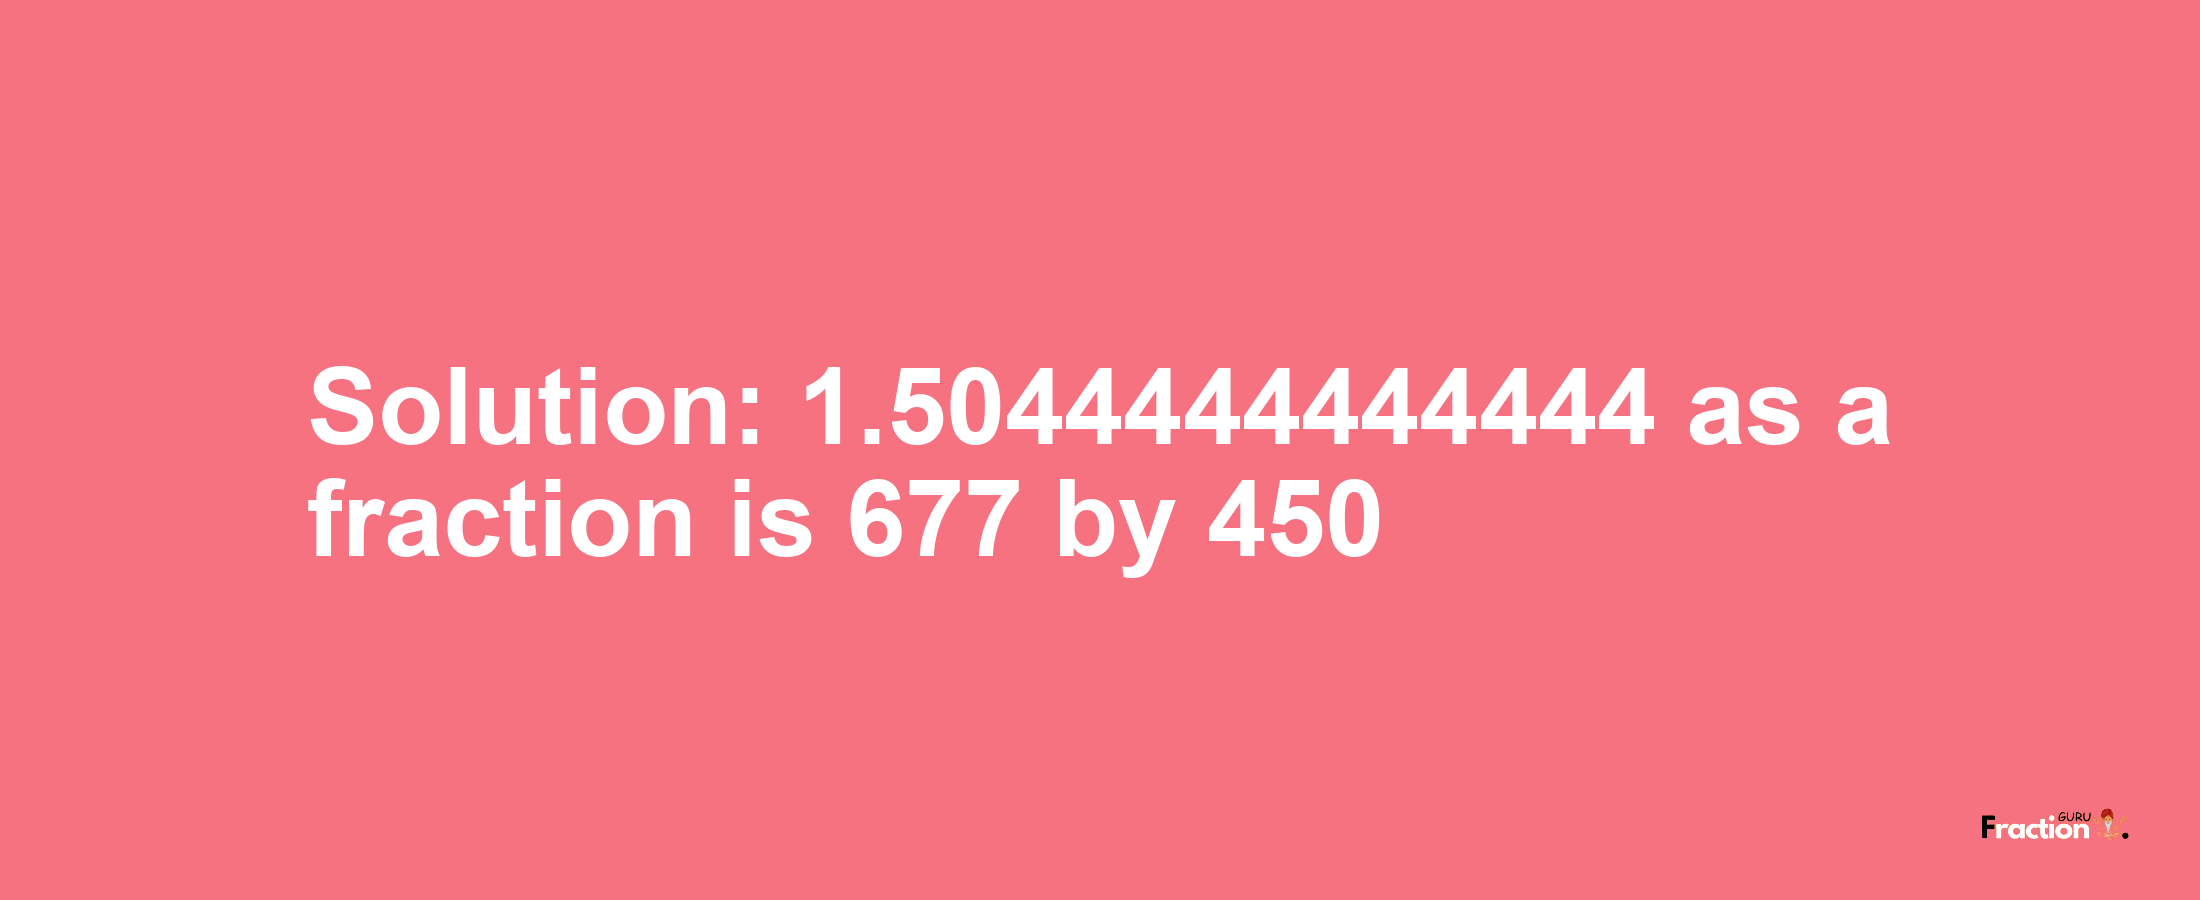 Solution:1.5044444444444 as a fraction is 677/450